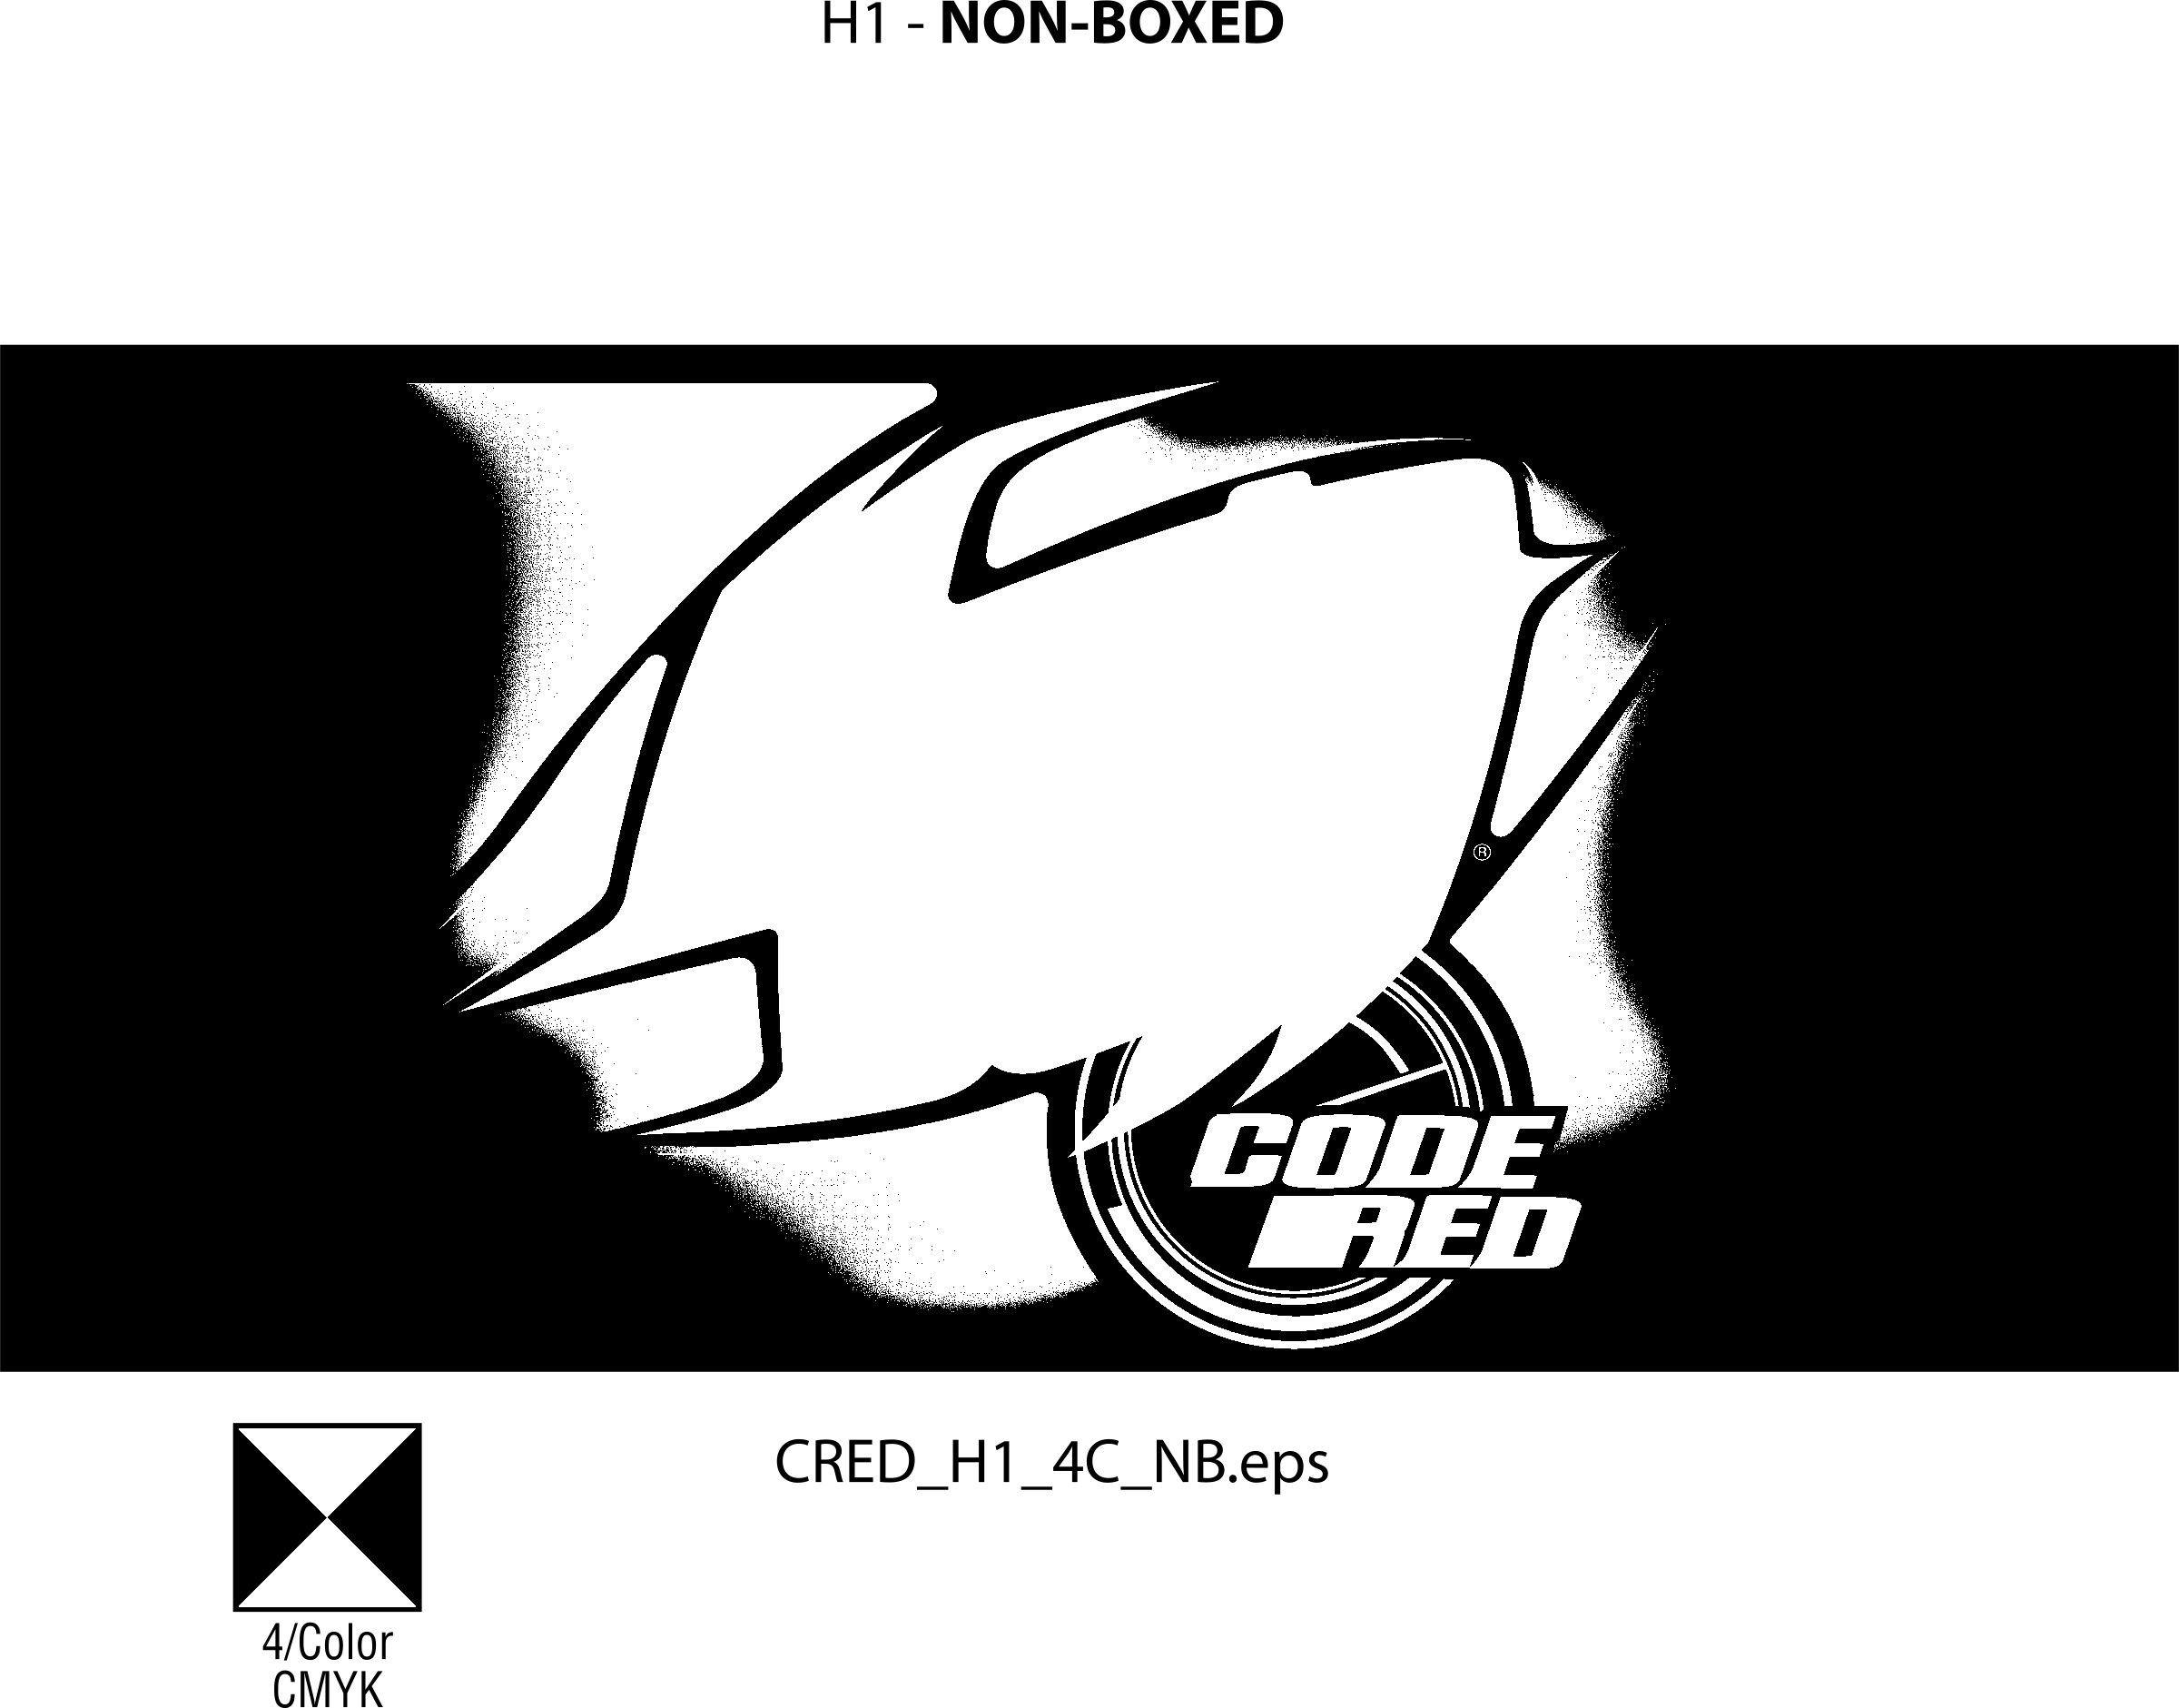 Red and Black MT Logo - Mountain Dew Code Red Logo PNG Transparent & SVG Vector - Freebie Supply